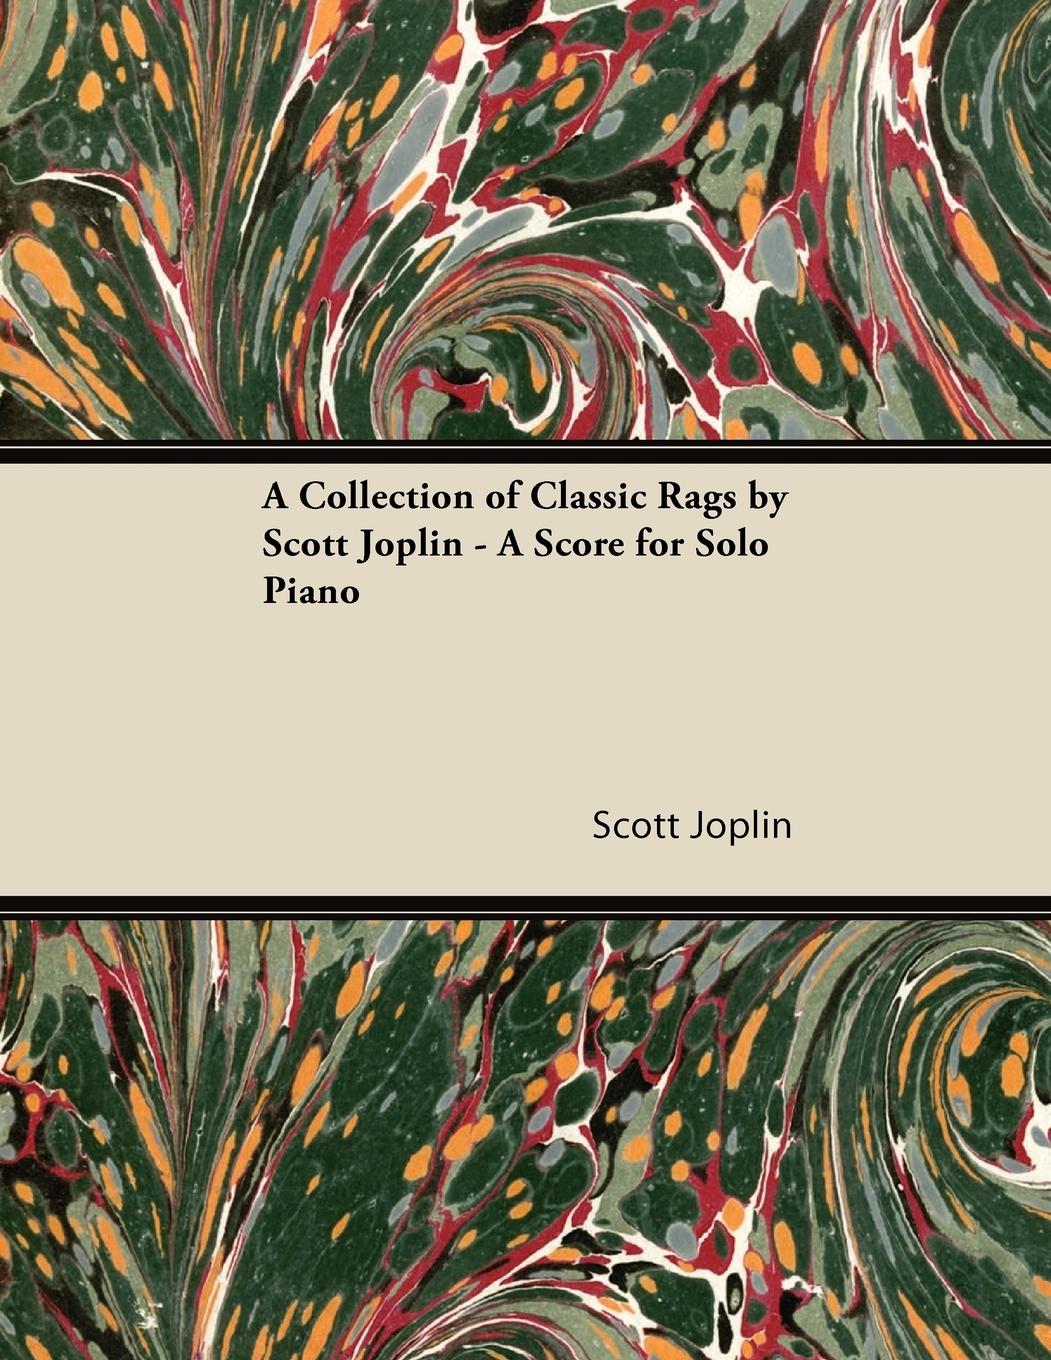 A Collection of Classic Rags by Scott Joplin - A Score for Solo Piano